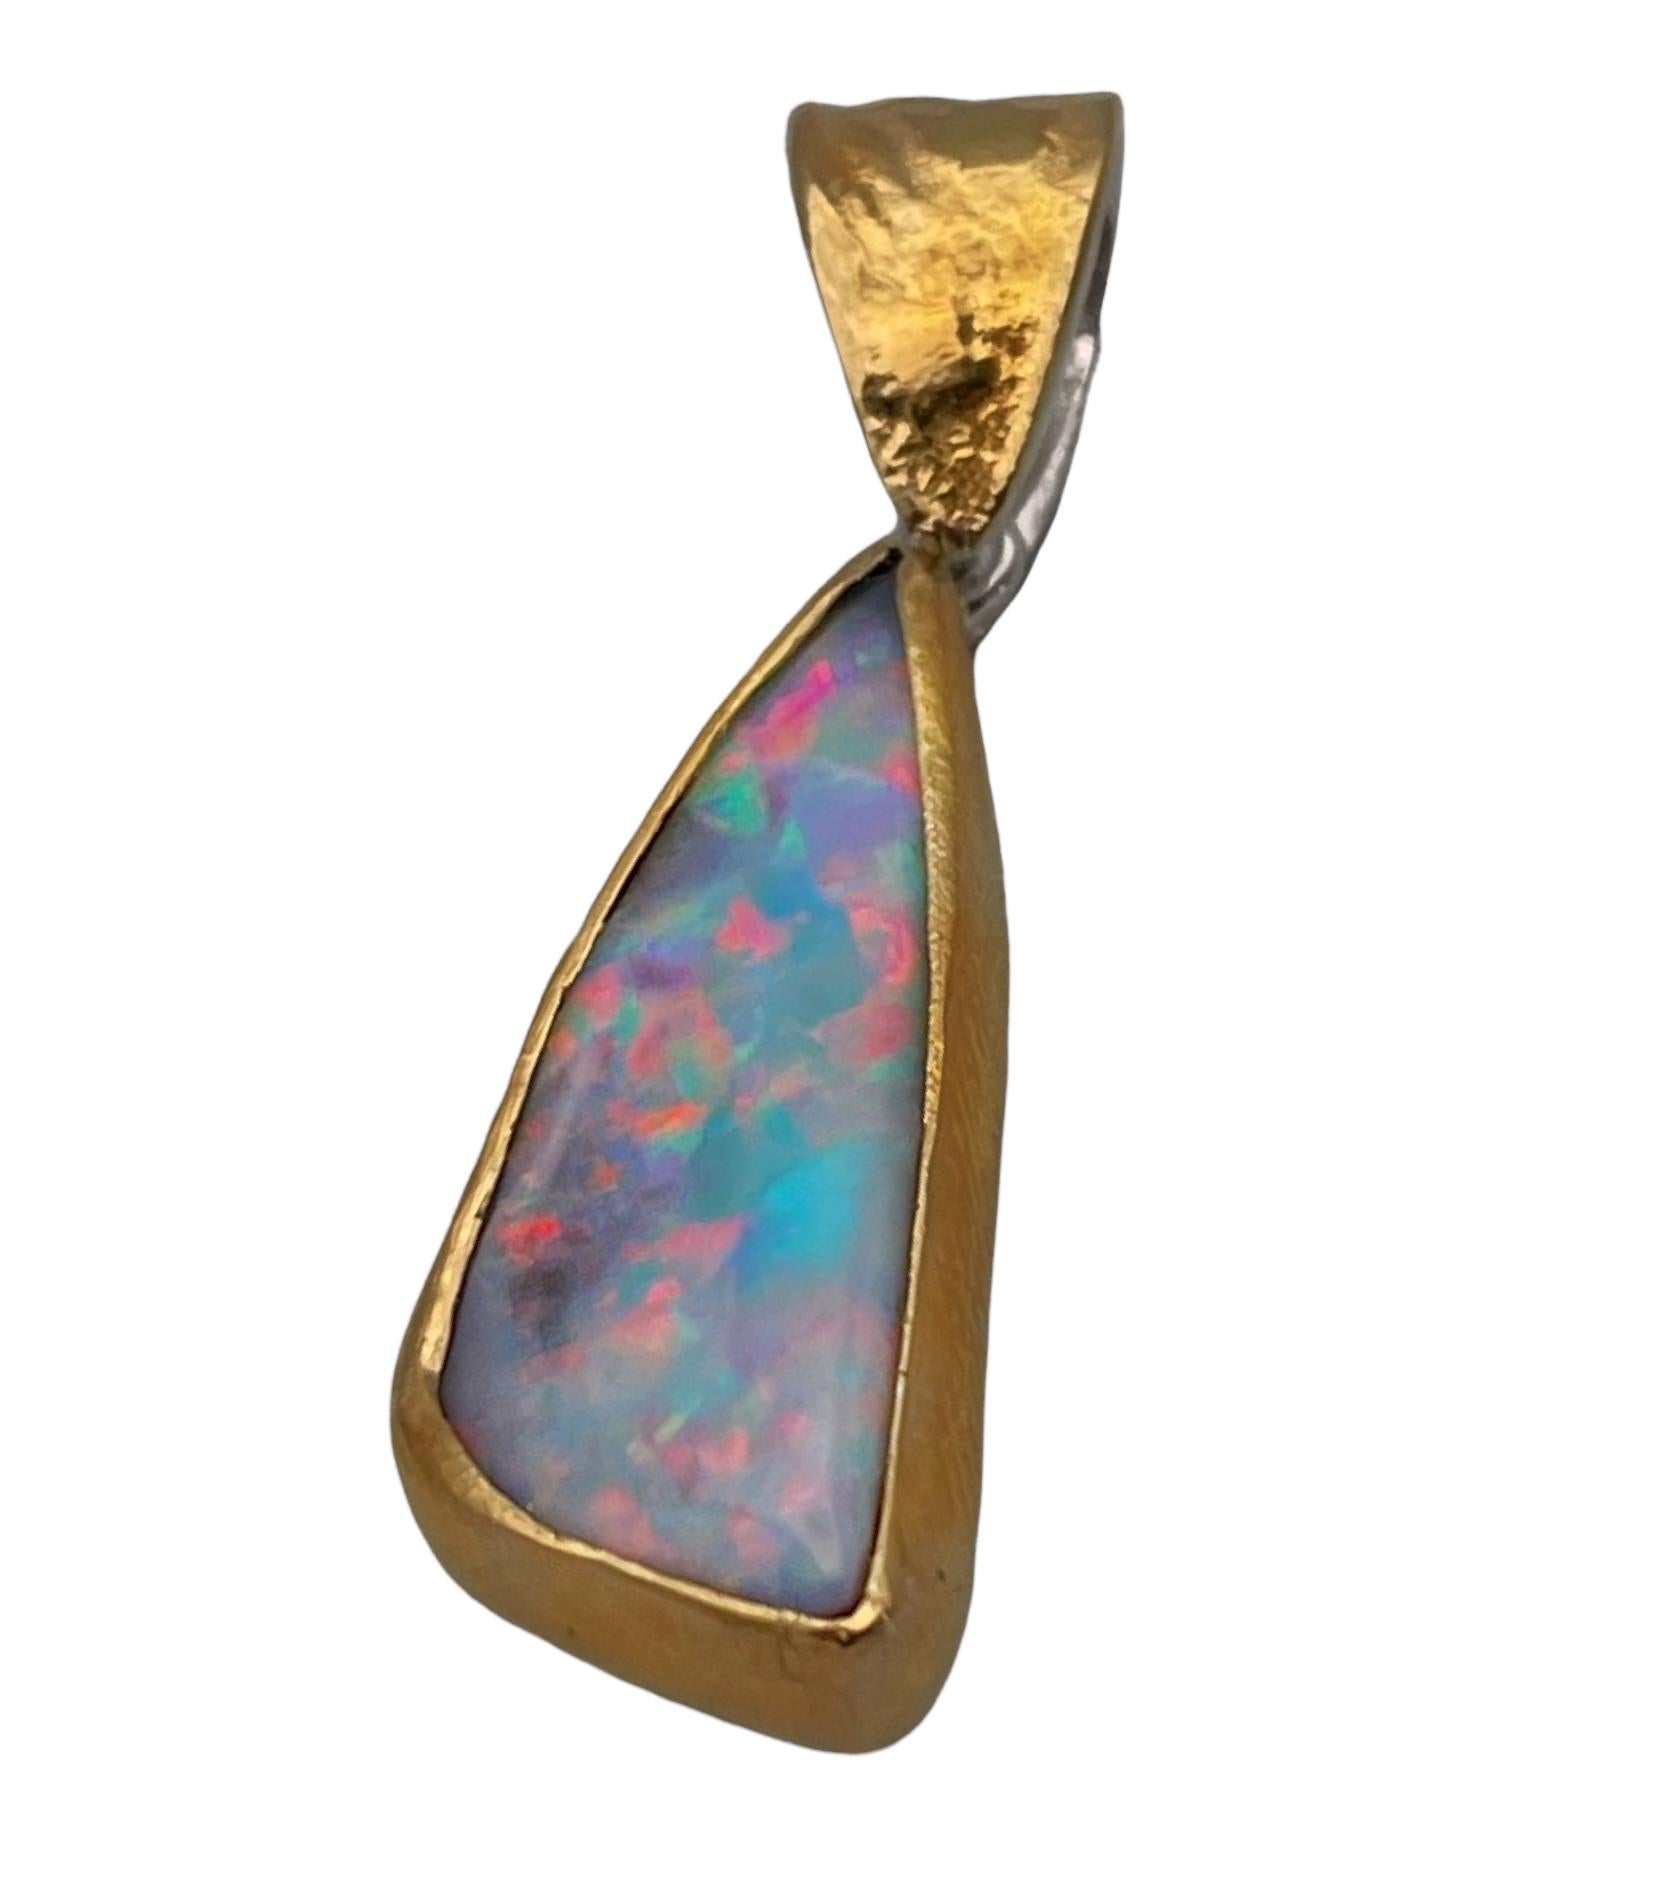 This is a gorgeous little boulder opal pendant with bright colourful flashes and movement. It has been carefully handcrafted and set in 22 karat yellow gold. It is backed with sterling silver where it has a large deep British hallmark stamped. The